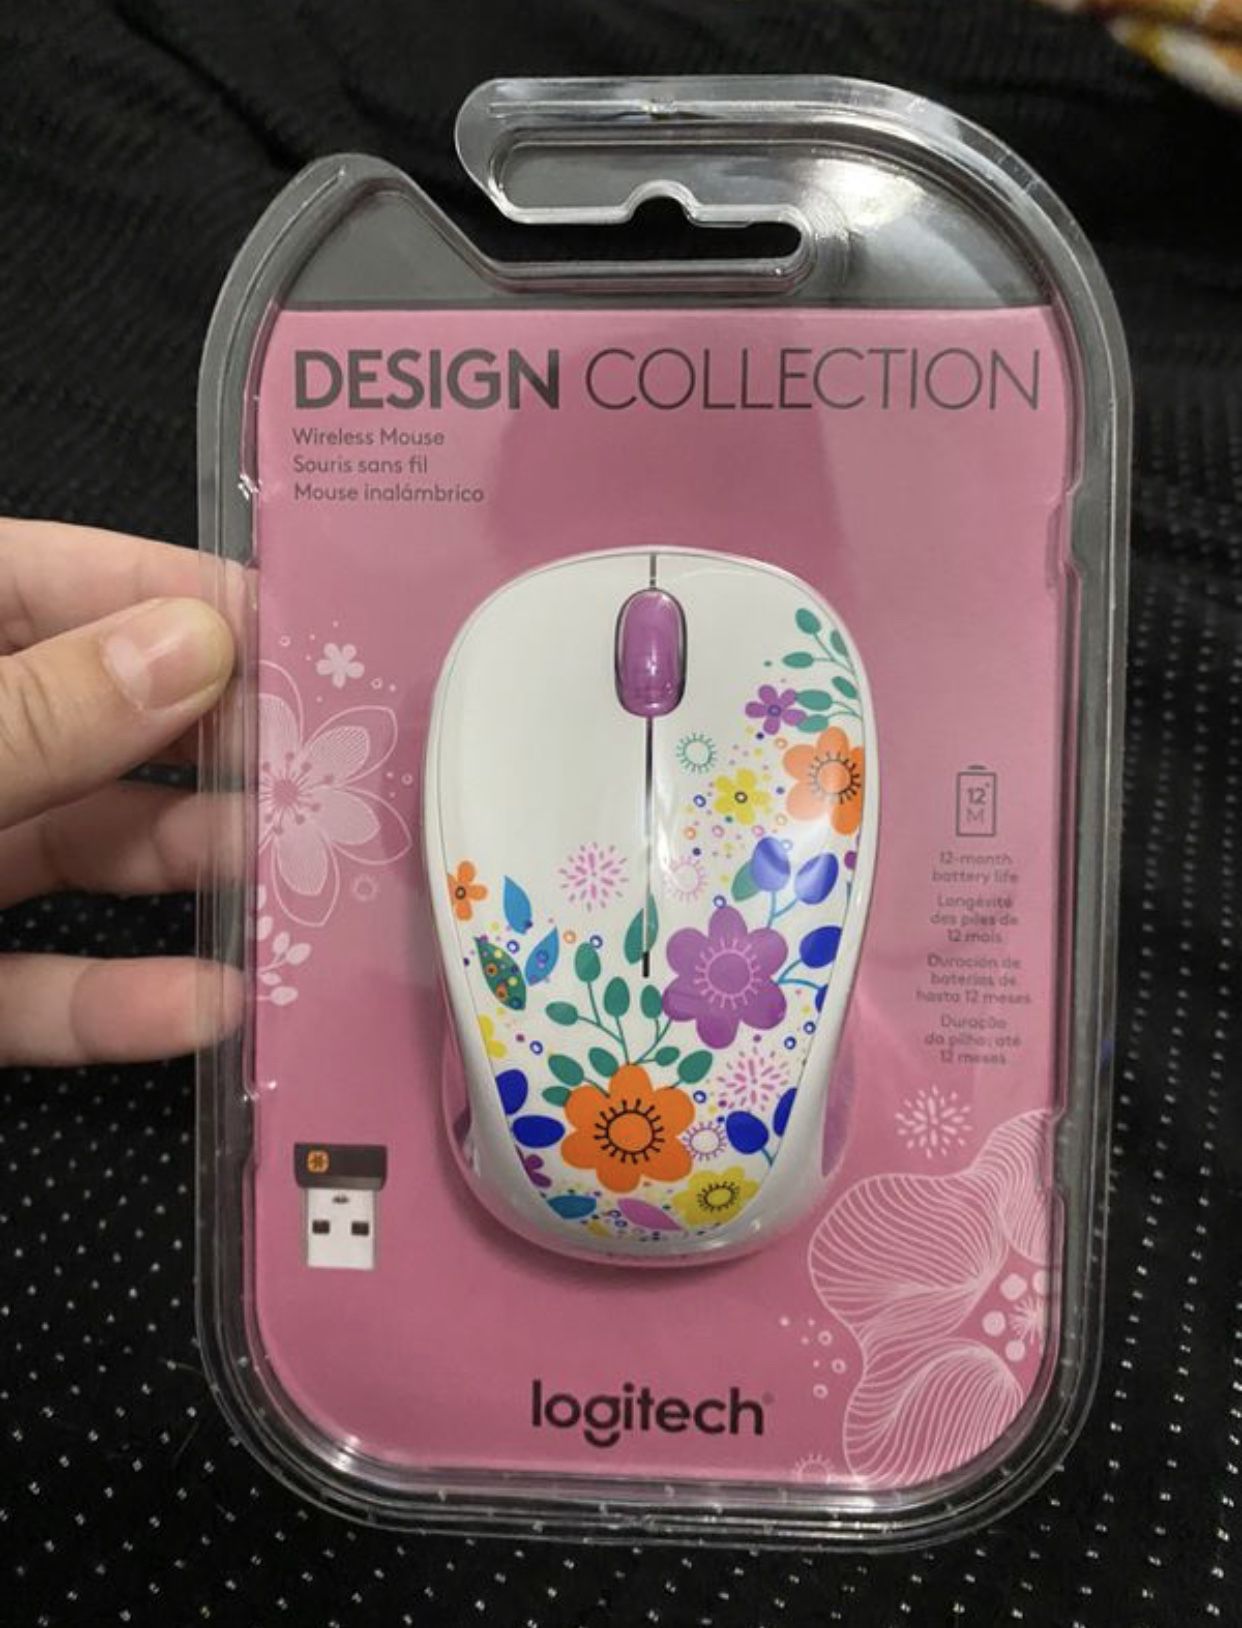 Logitech DESIGN COLLECTION Wireless Mouse: Spring Meadow